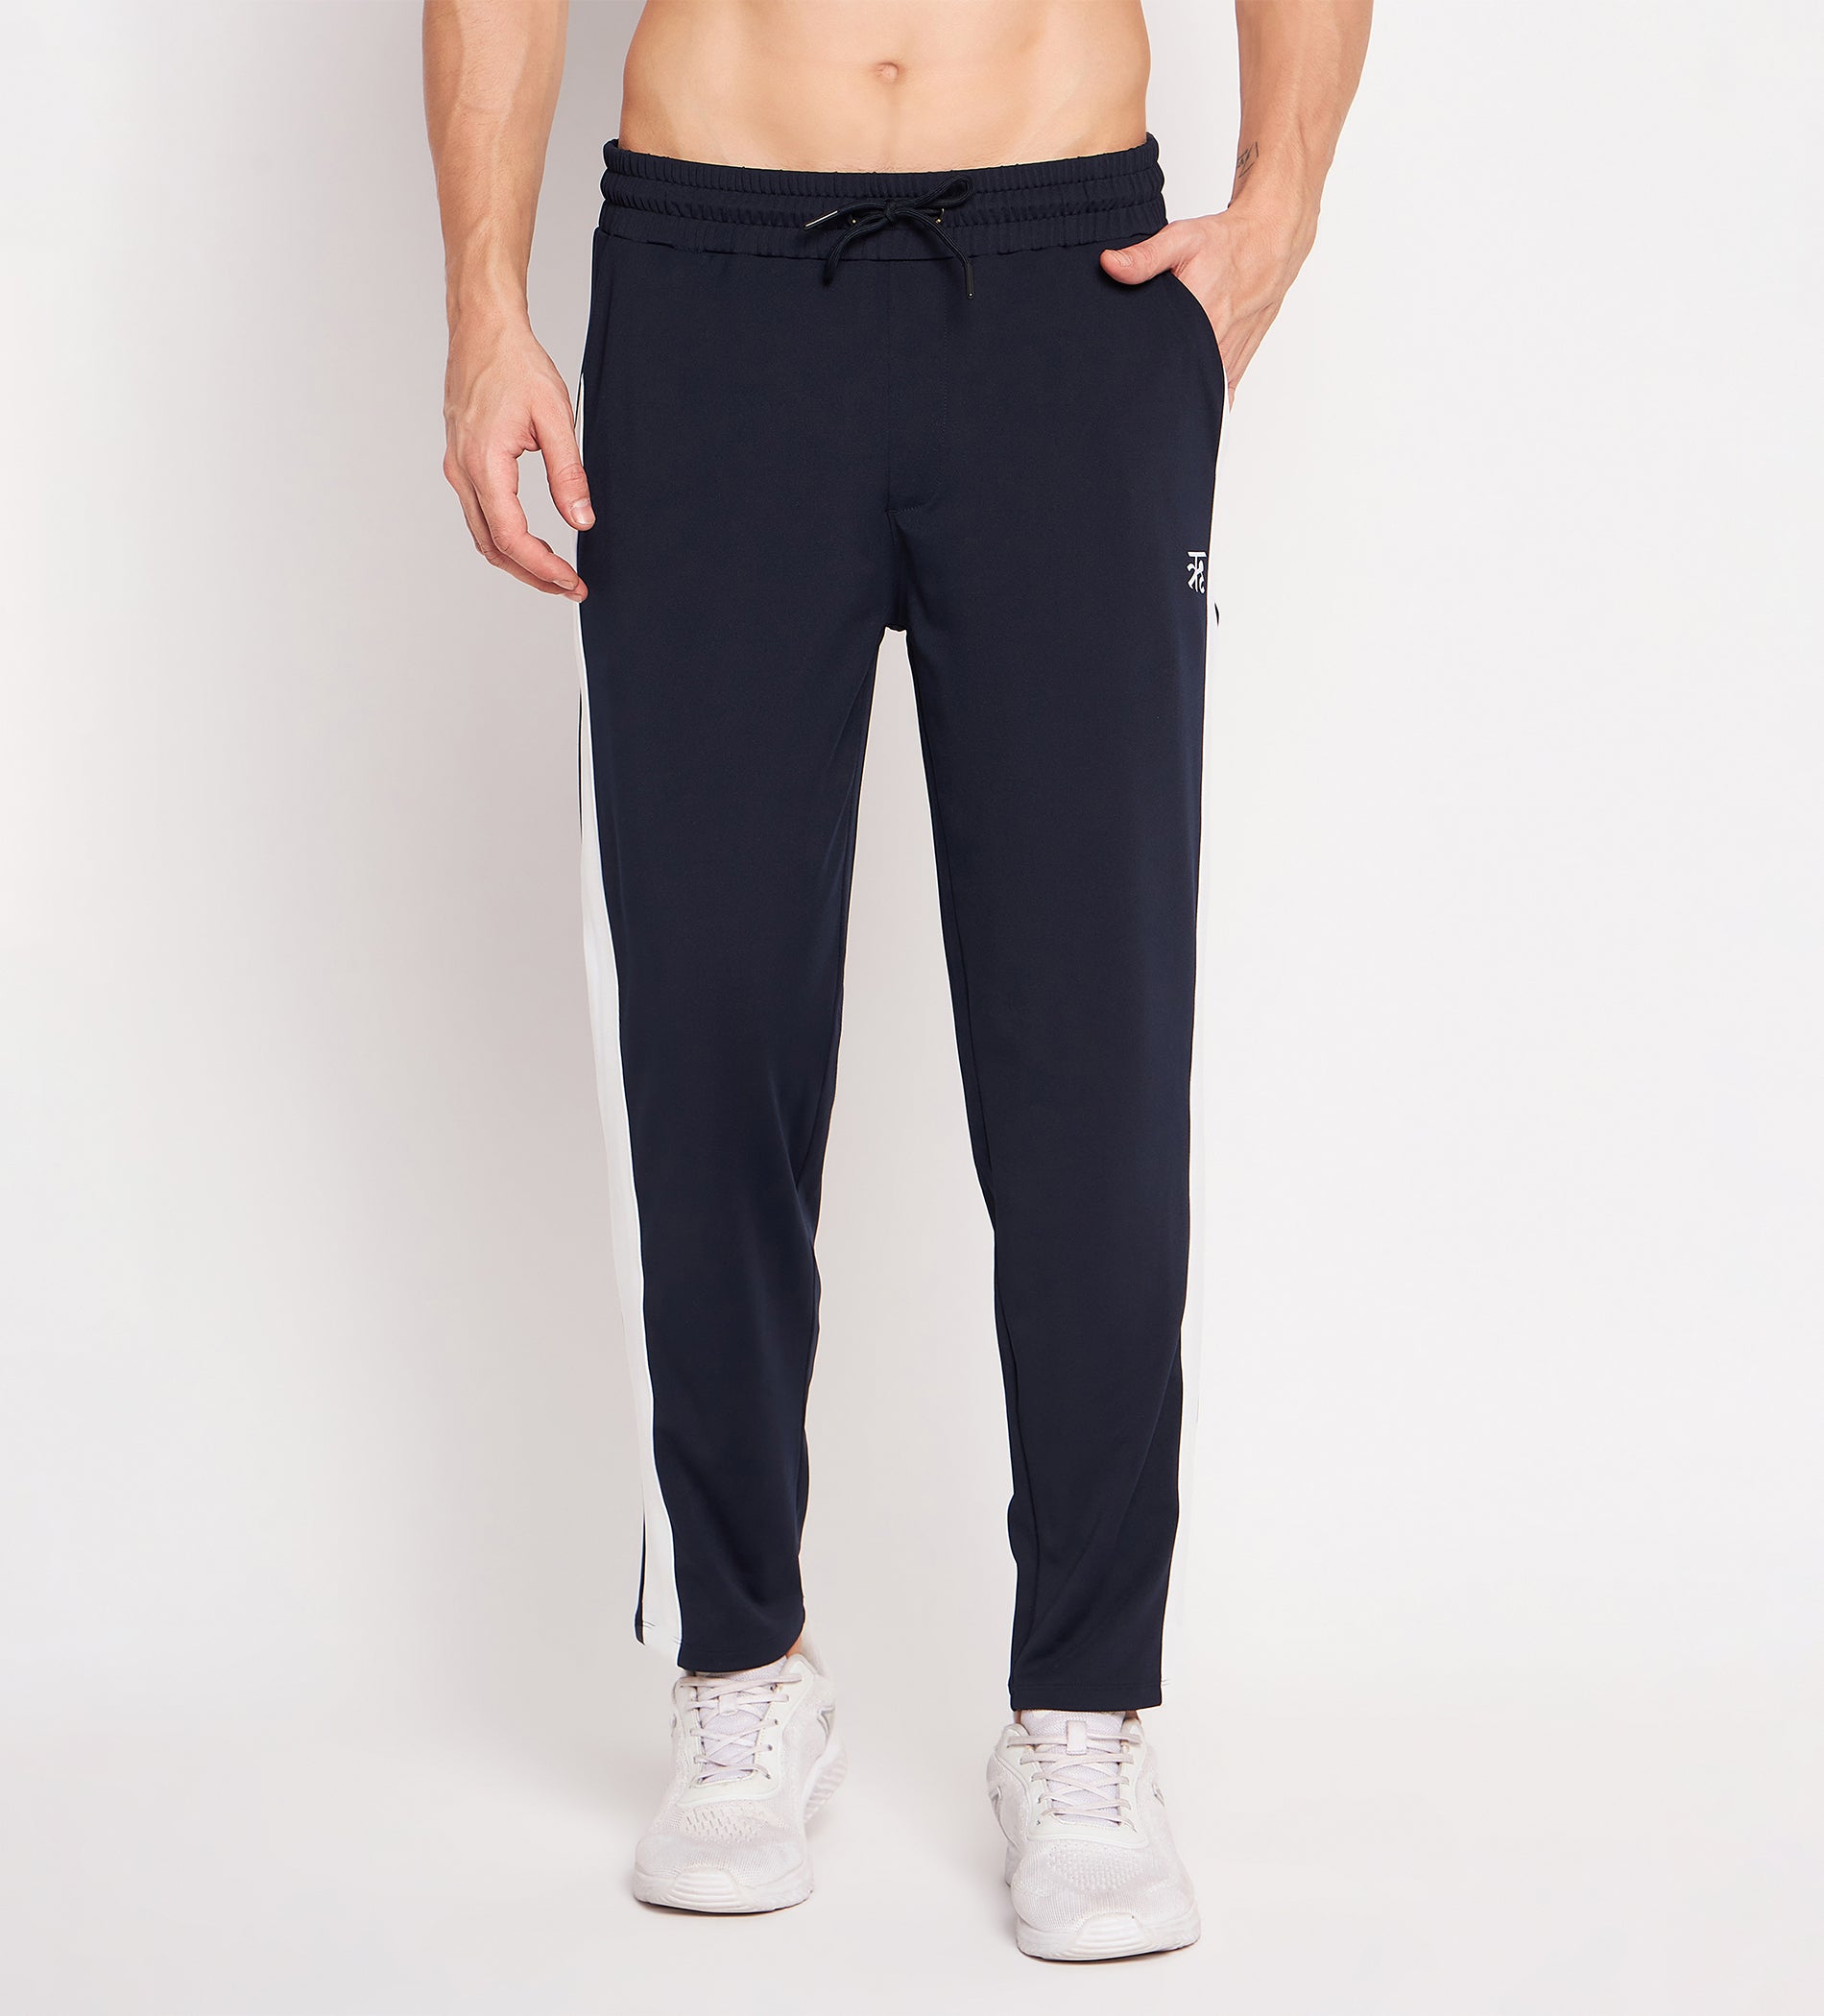 Navy Straight Fit Track Pants with White Side Panels